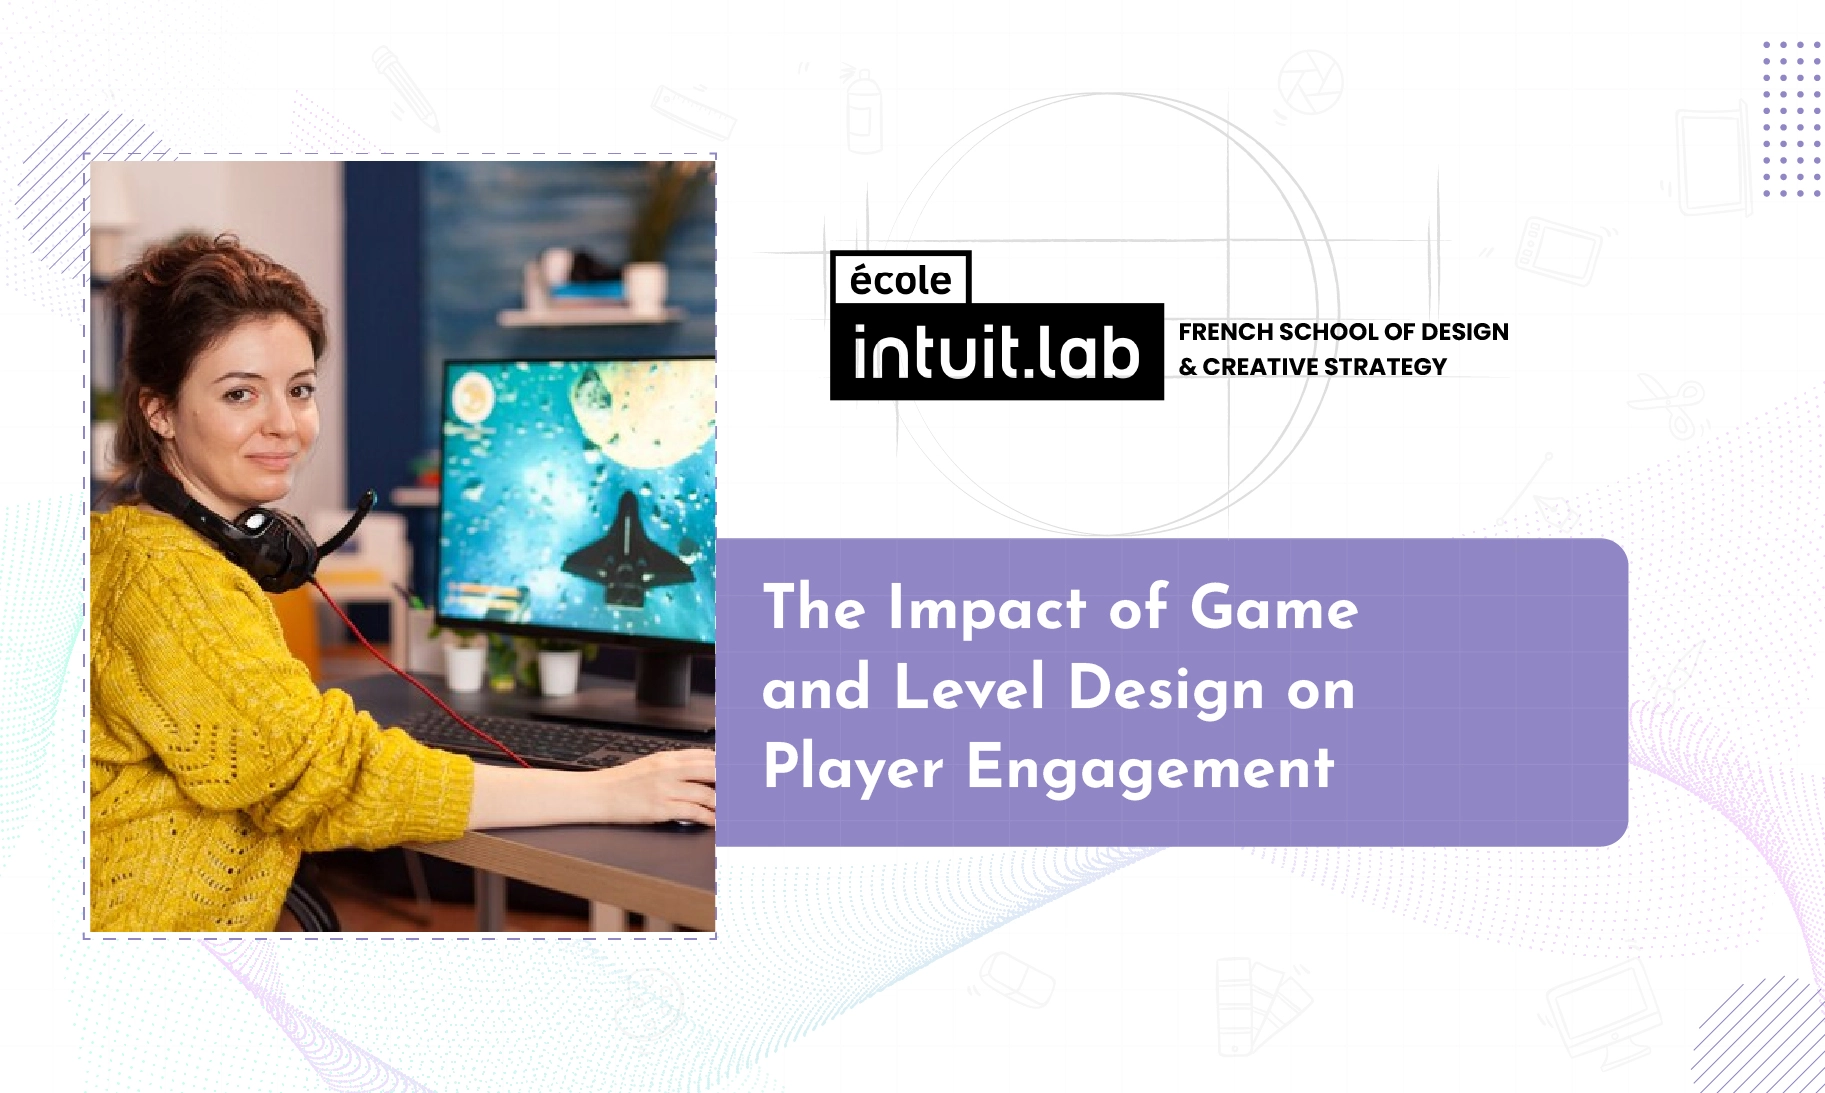 The Impact of Game and Level Design on Player Engagement